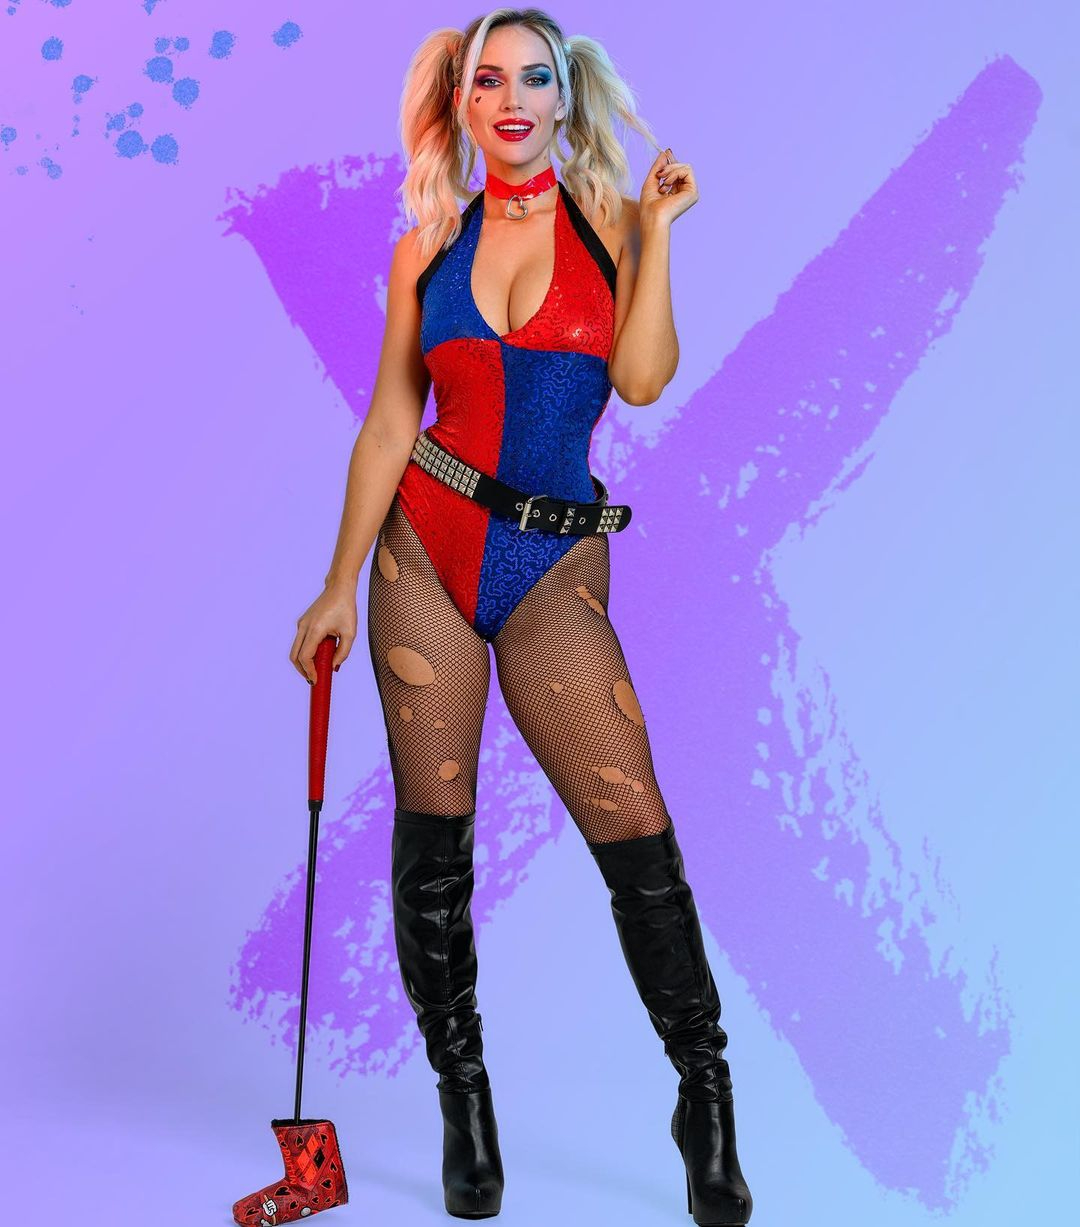 Paige dressed as Harley Quinn for Halloween in 2022